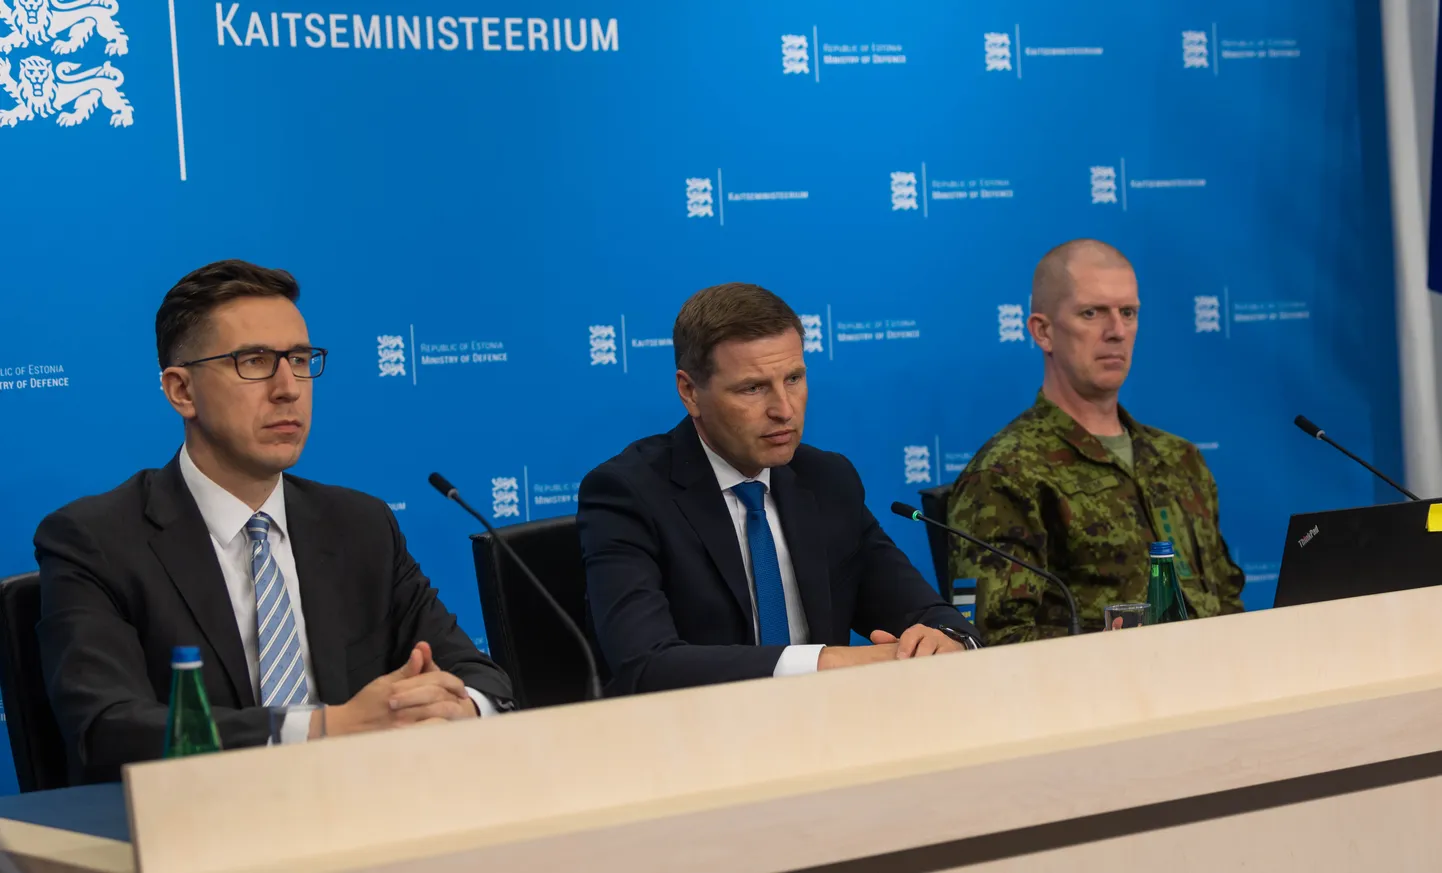 Secretary General of the Ministry of Defense Kusti Salm, Defense Minister Hanno Pevkur, and commander of the defense forces, Gen. Martin Herem.